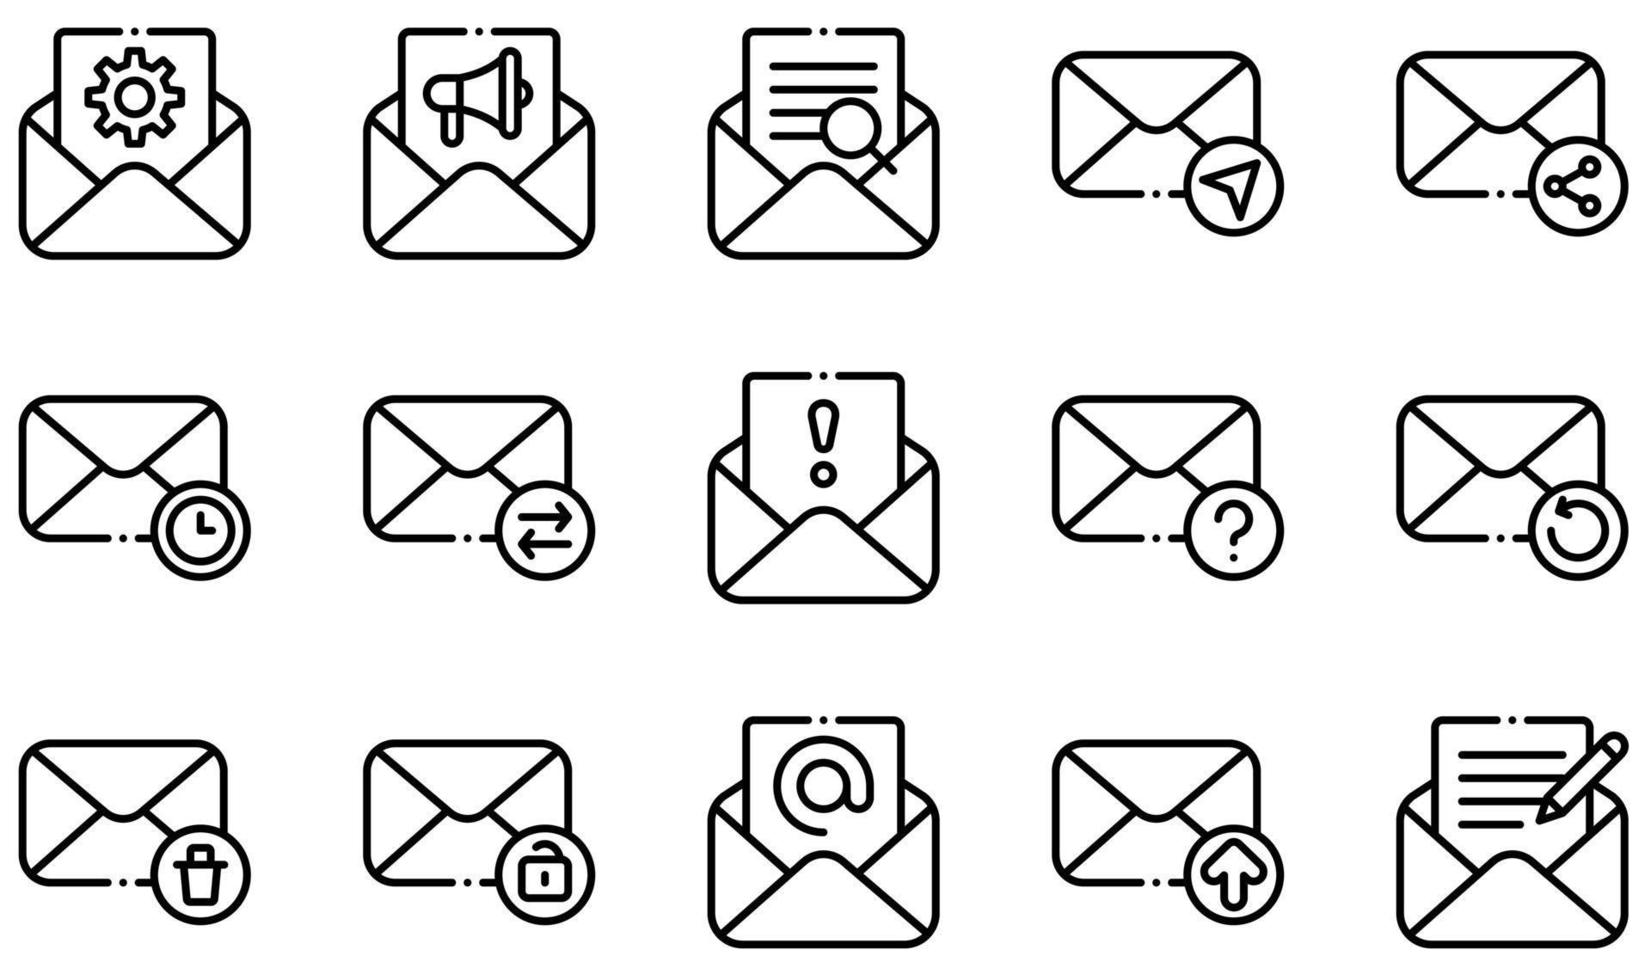 Set of Vector Icons Related to Email. Contains such Icons as Open Email, Options, Searching, Send Mail, Spam, Upload and more.